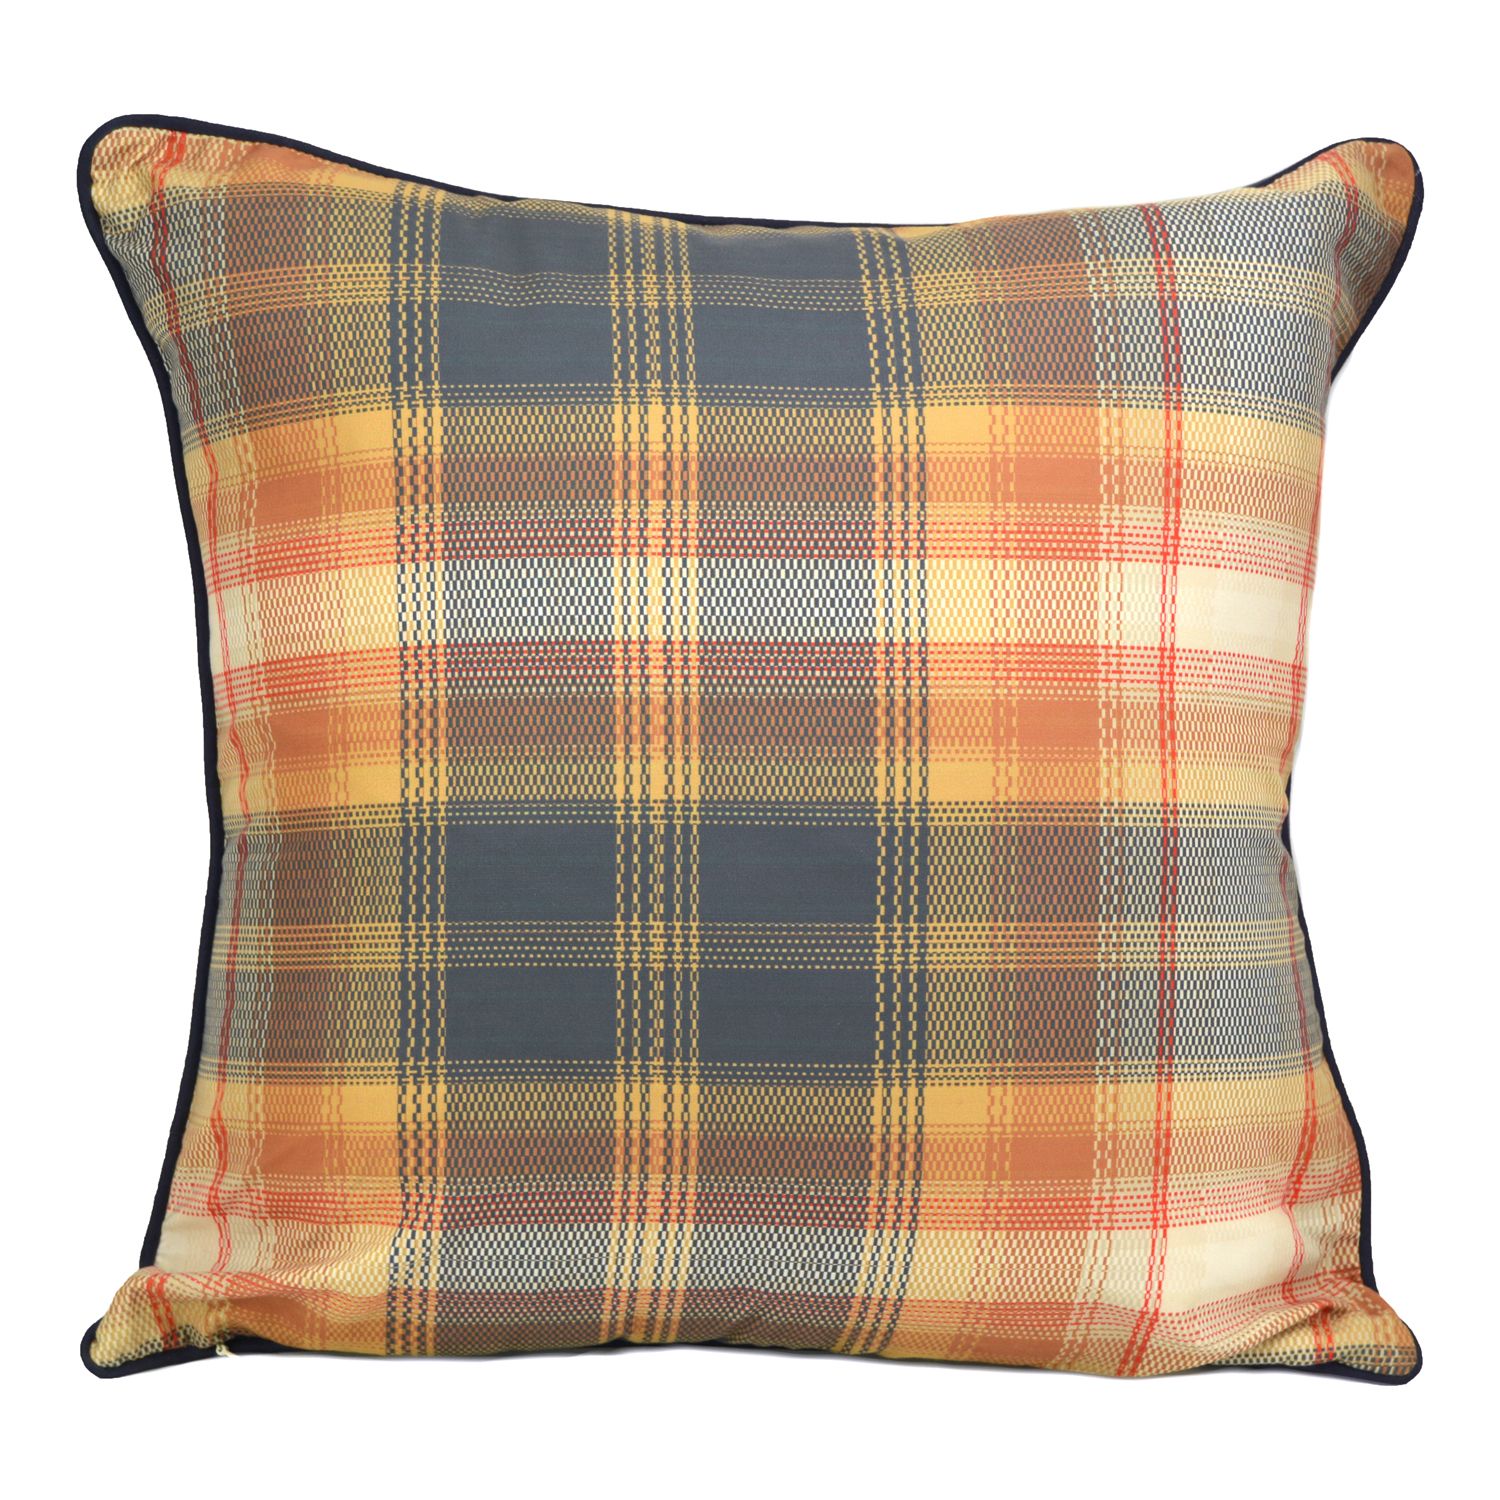 Image for Donna Sharp Pine Boughs Decorative Pillow at Kohl's.